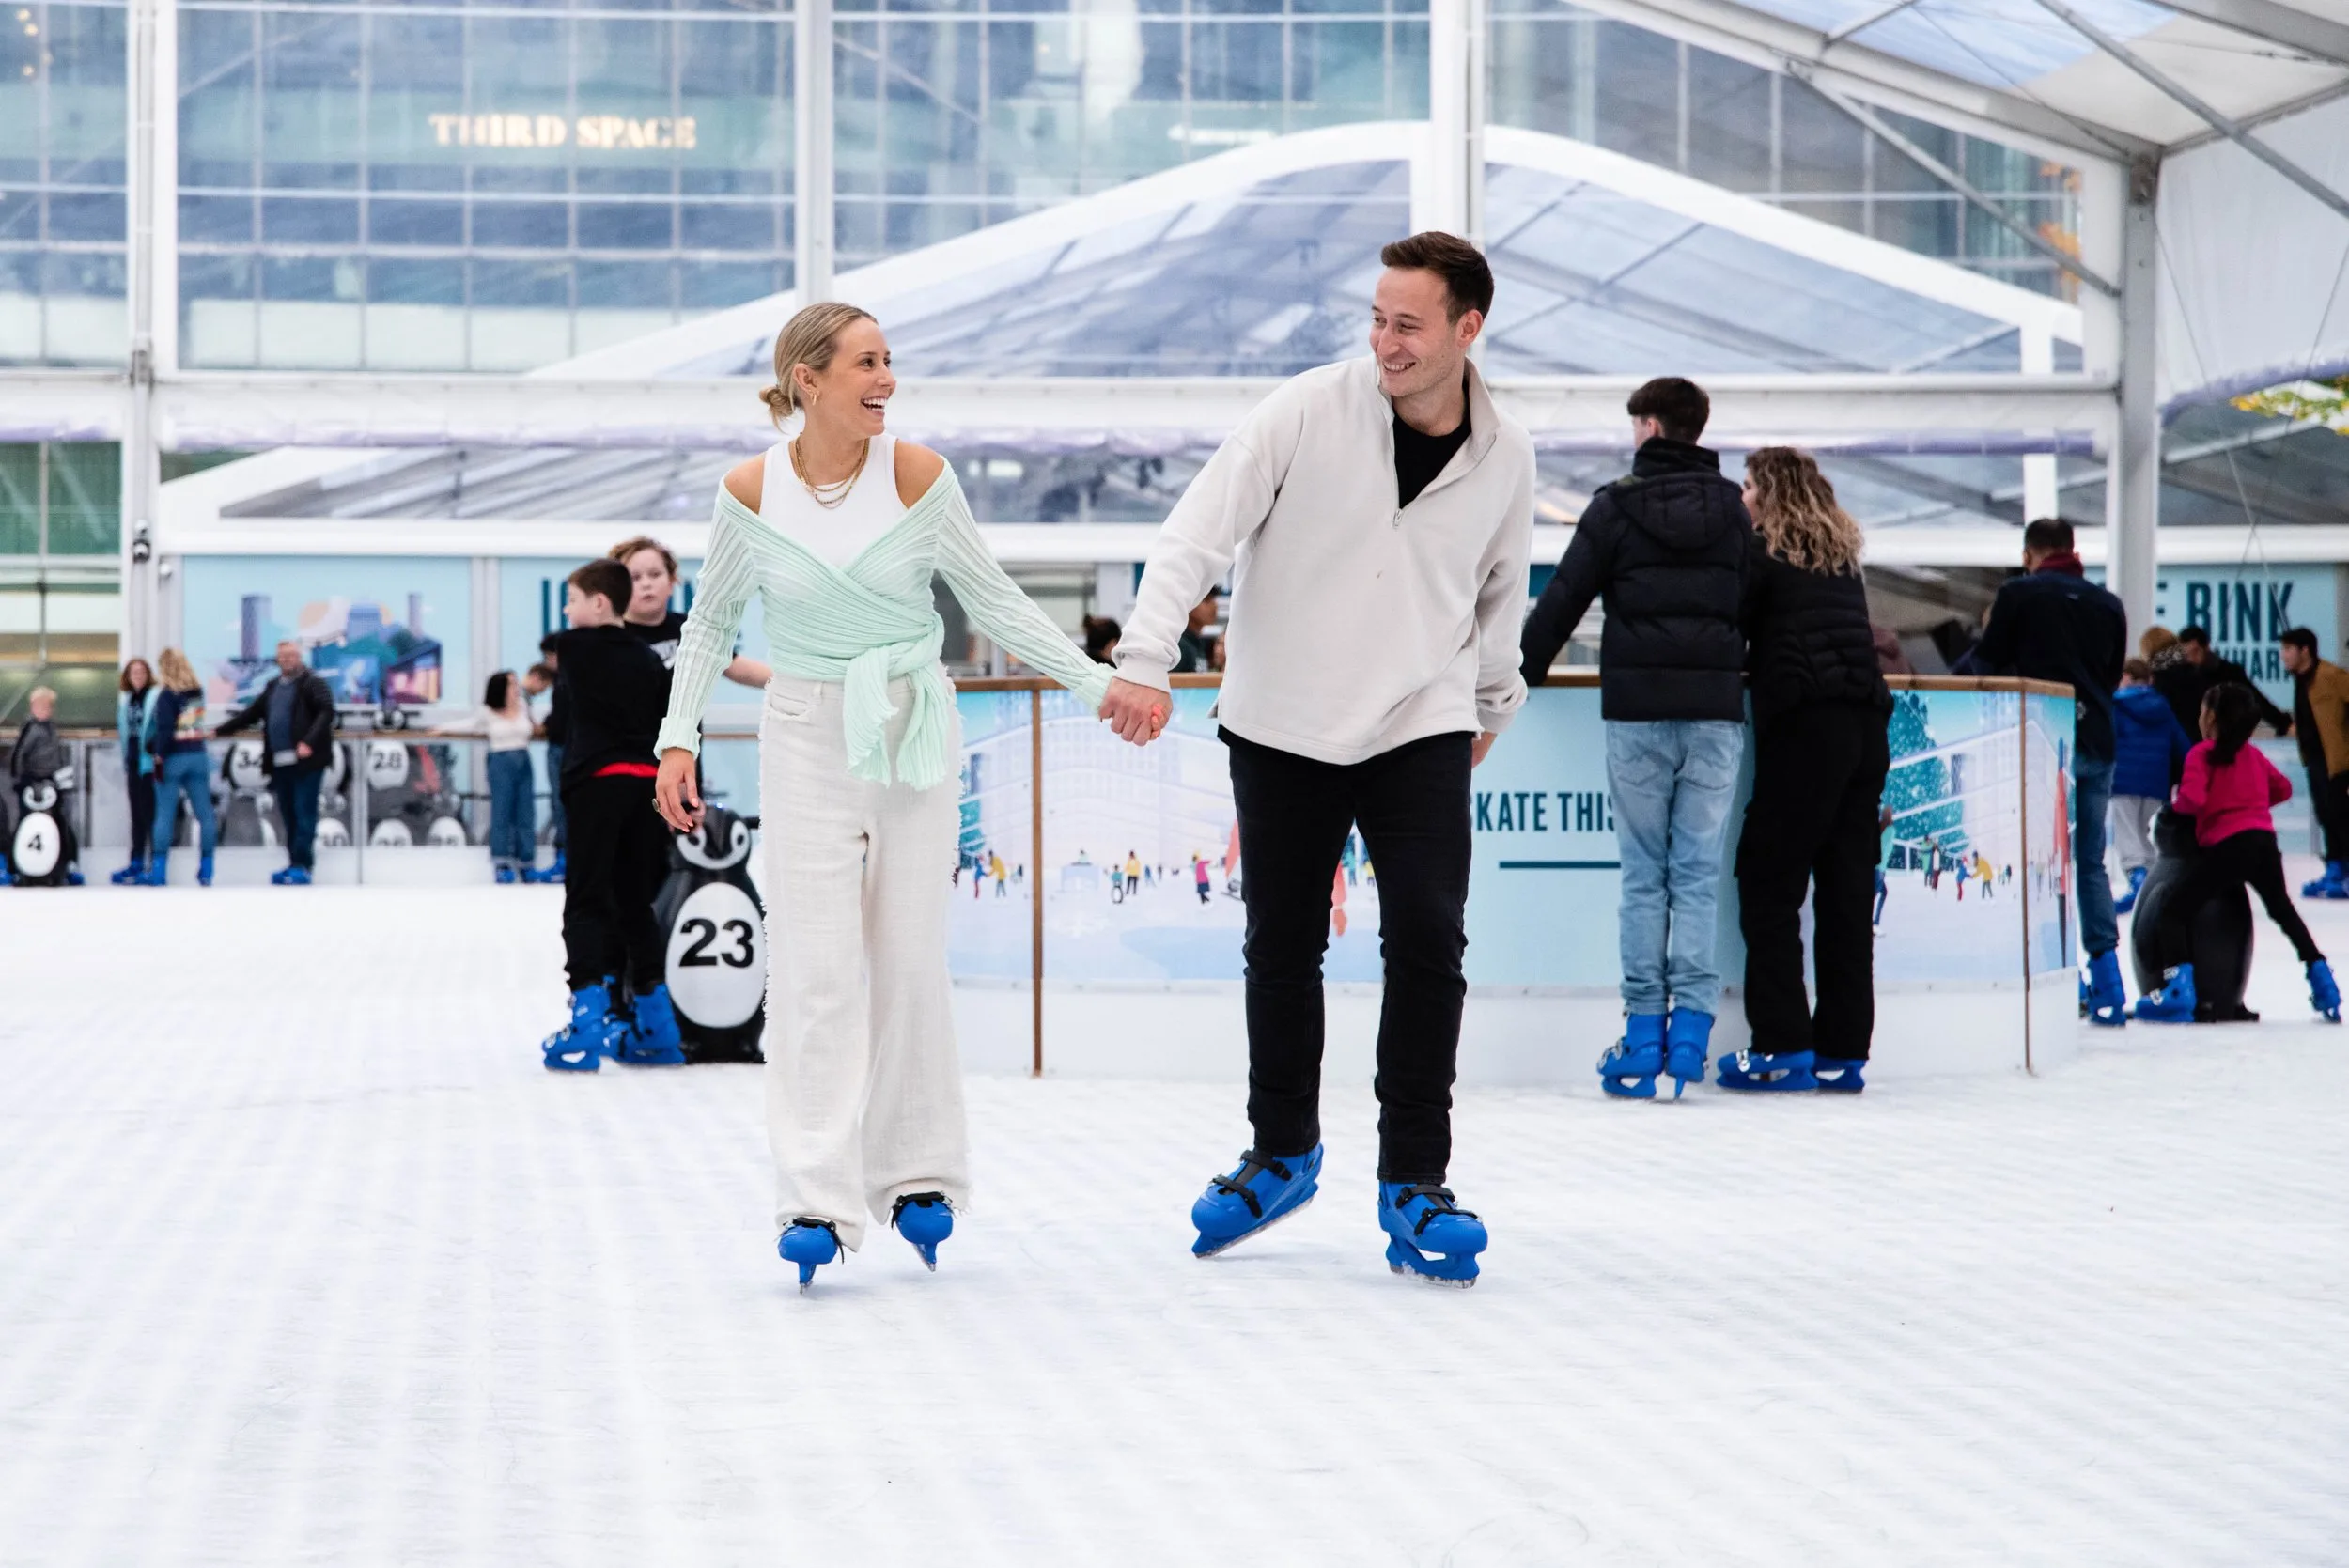 Ice Rink Canary Wharf Ticket Prices - Adult/Teen